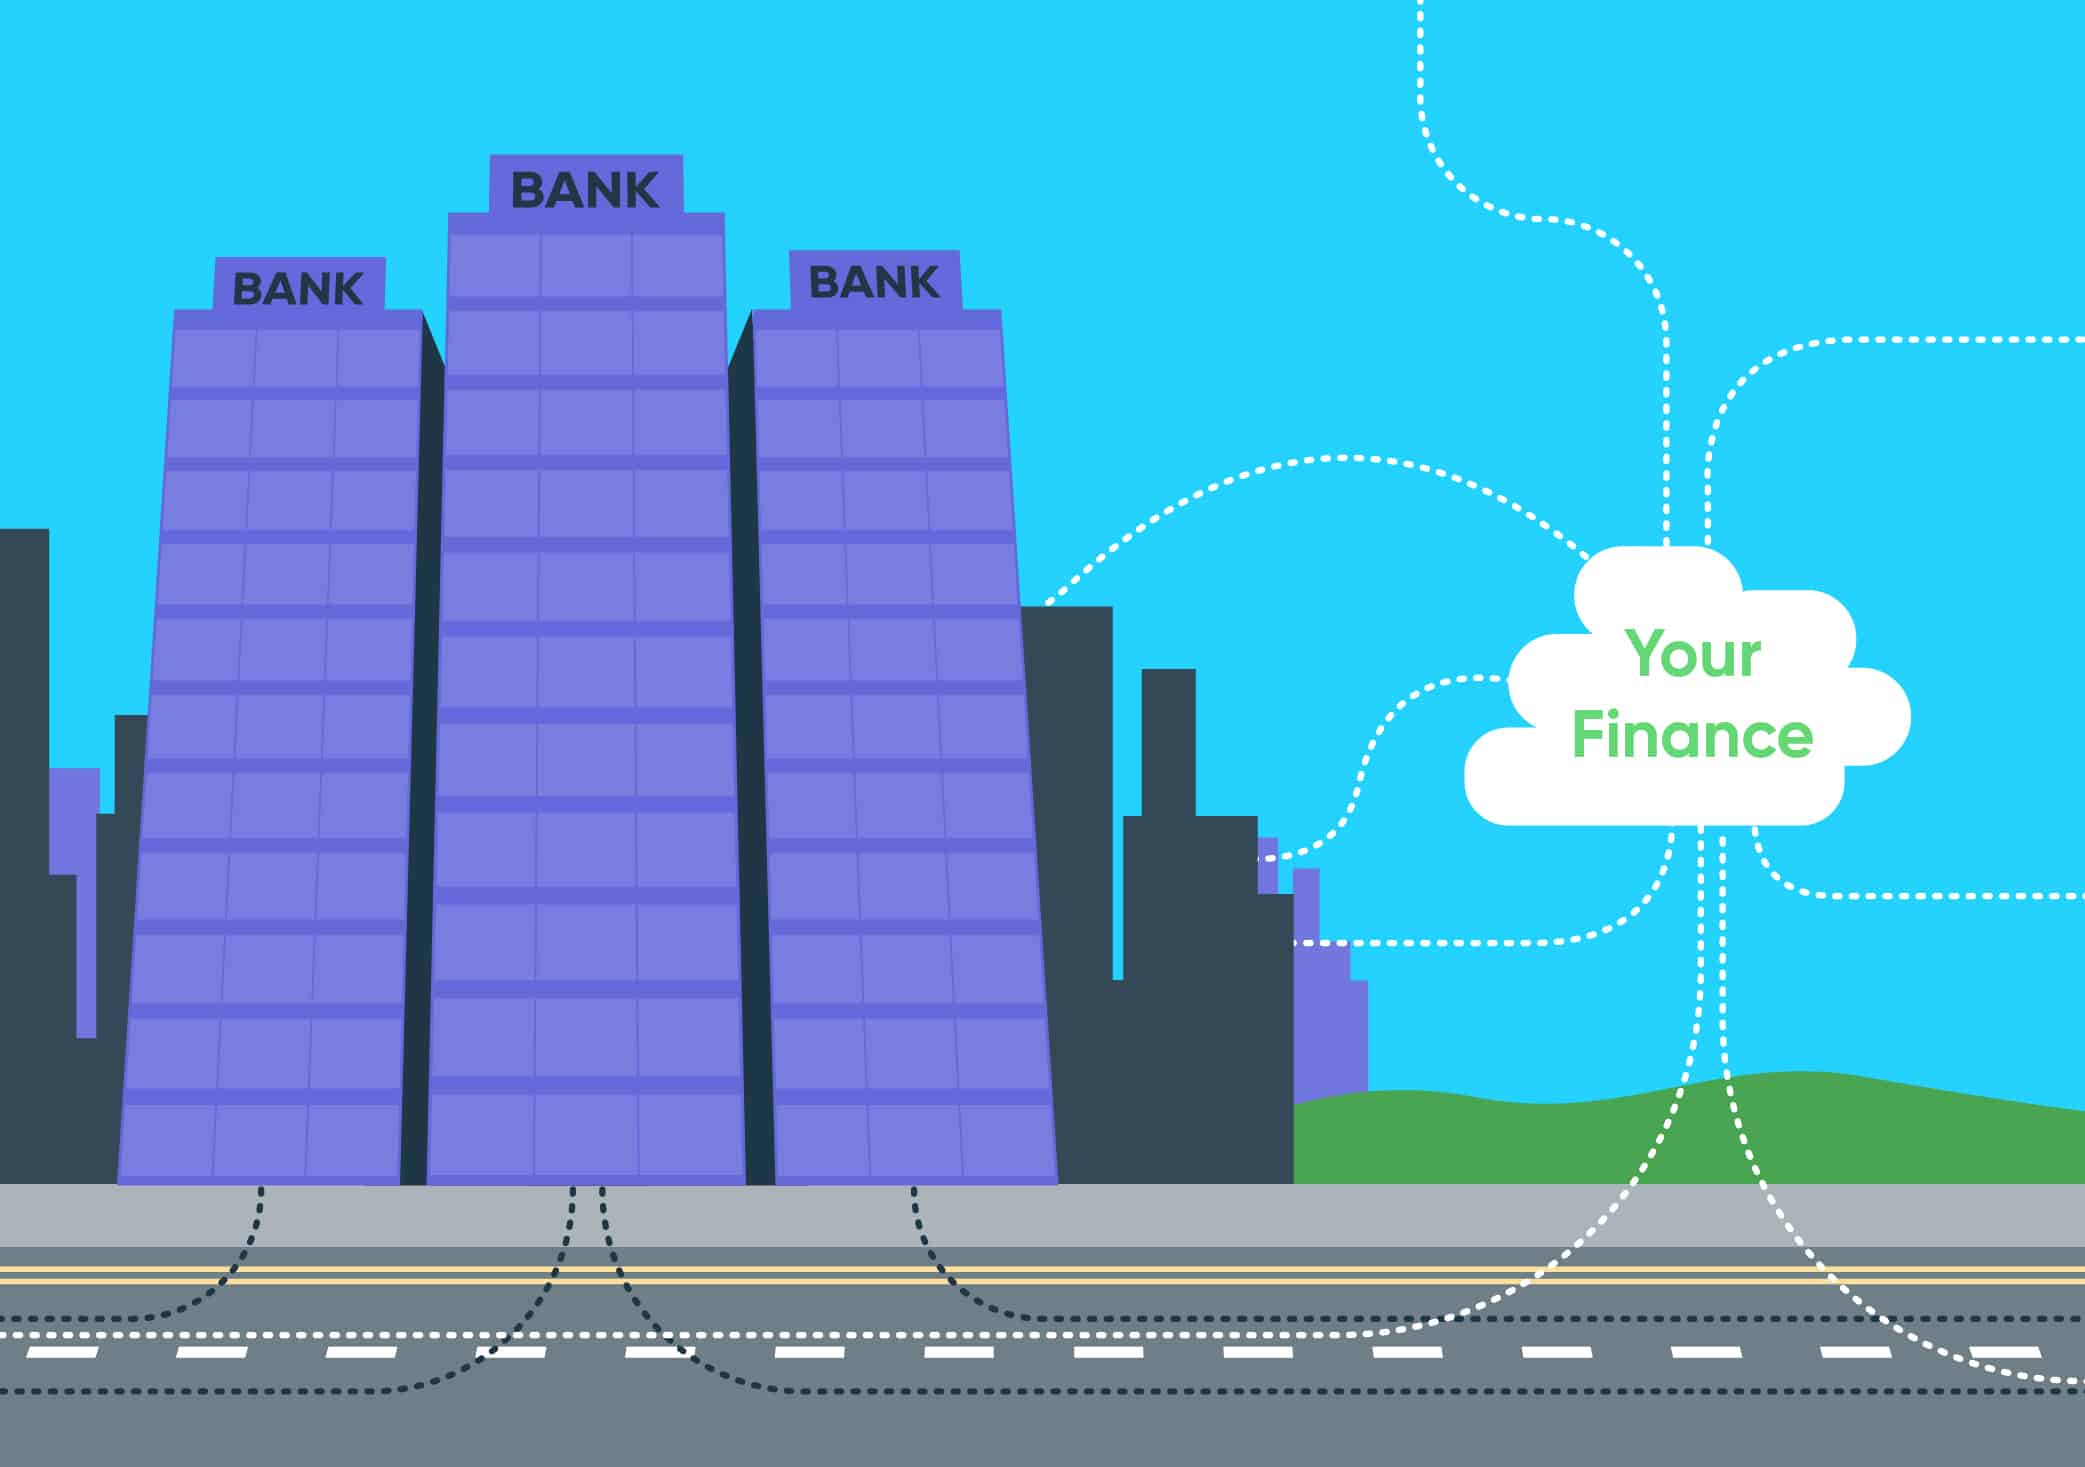 Here's How Your Finance Business Can Compete with Big Banks